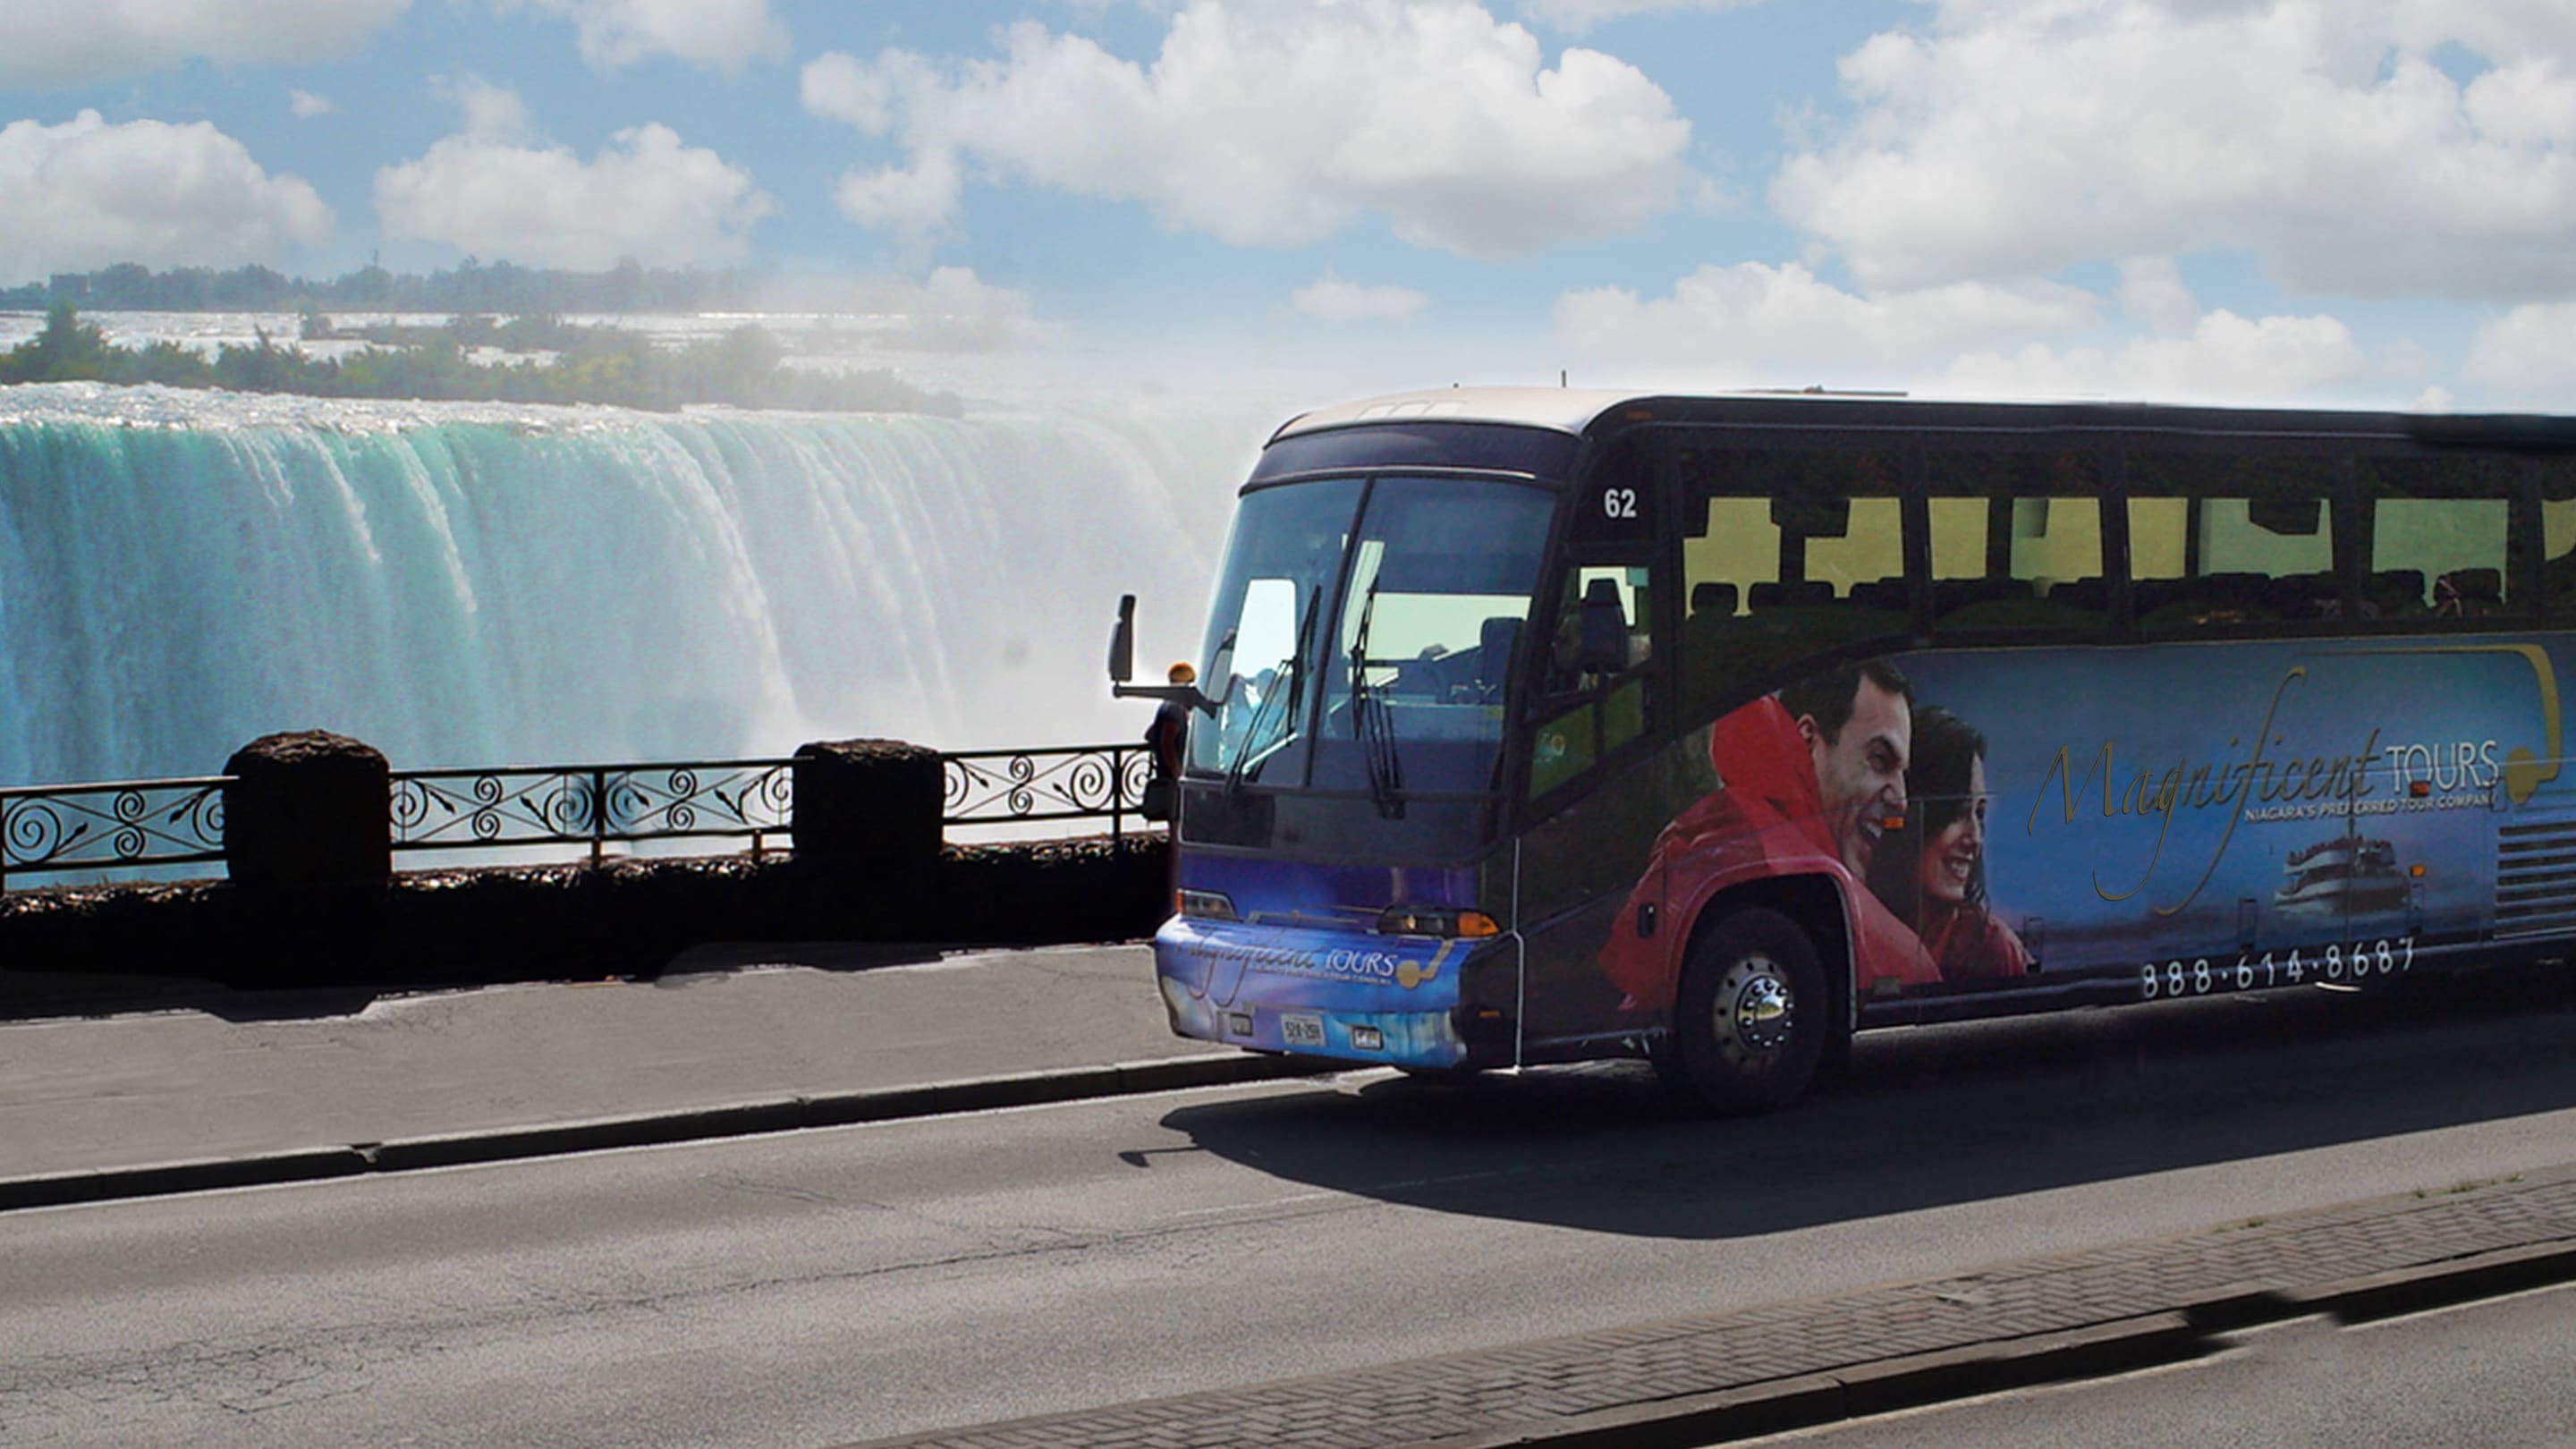 tour bus overlooking the falls